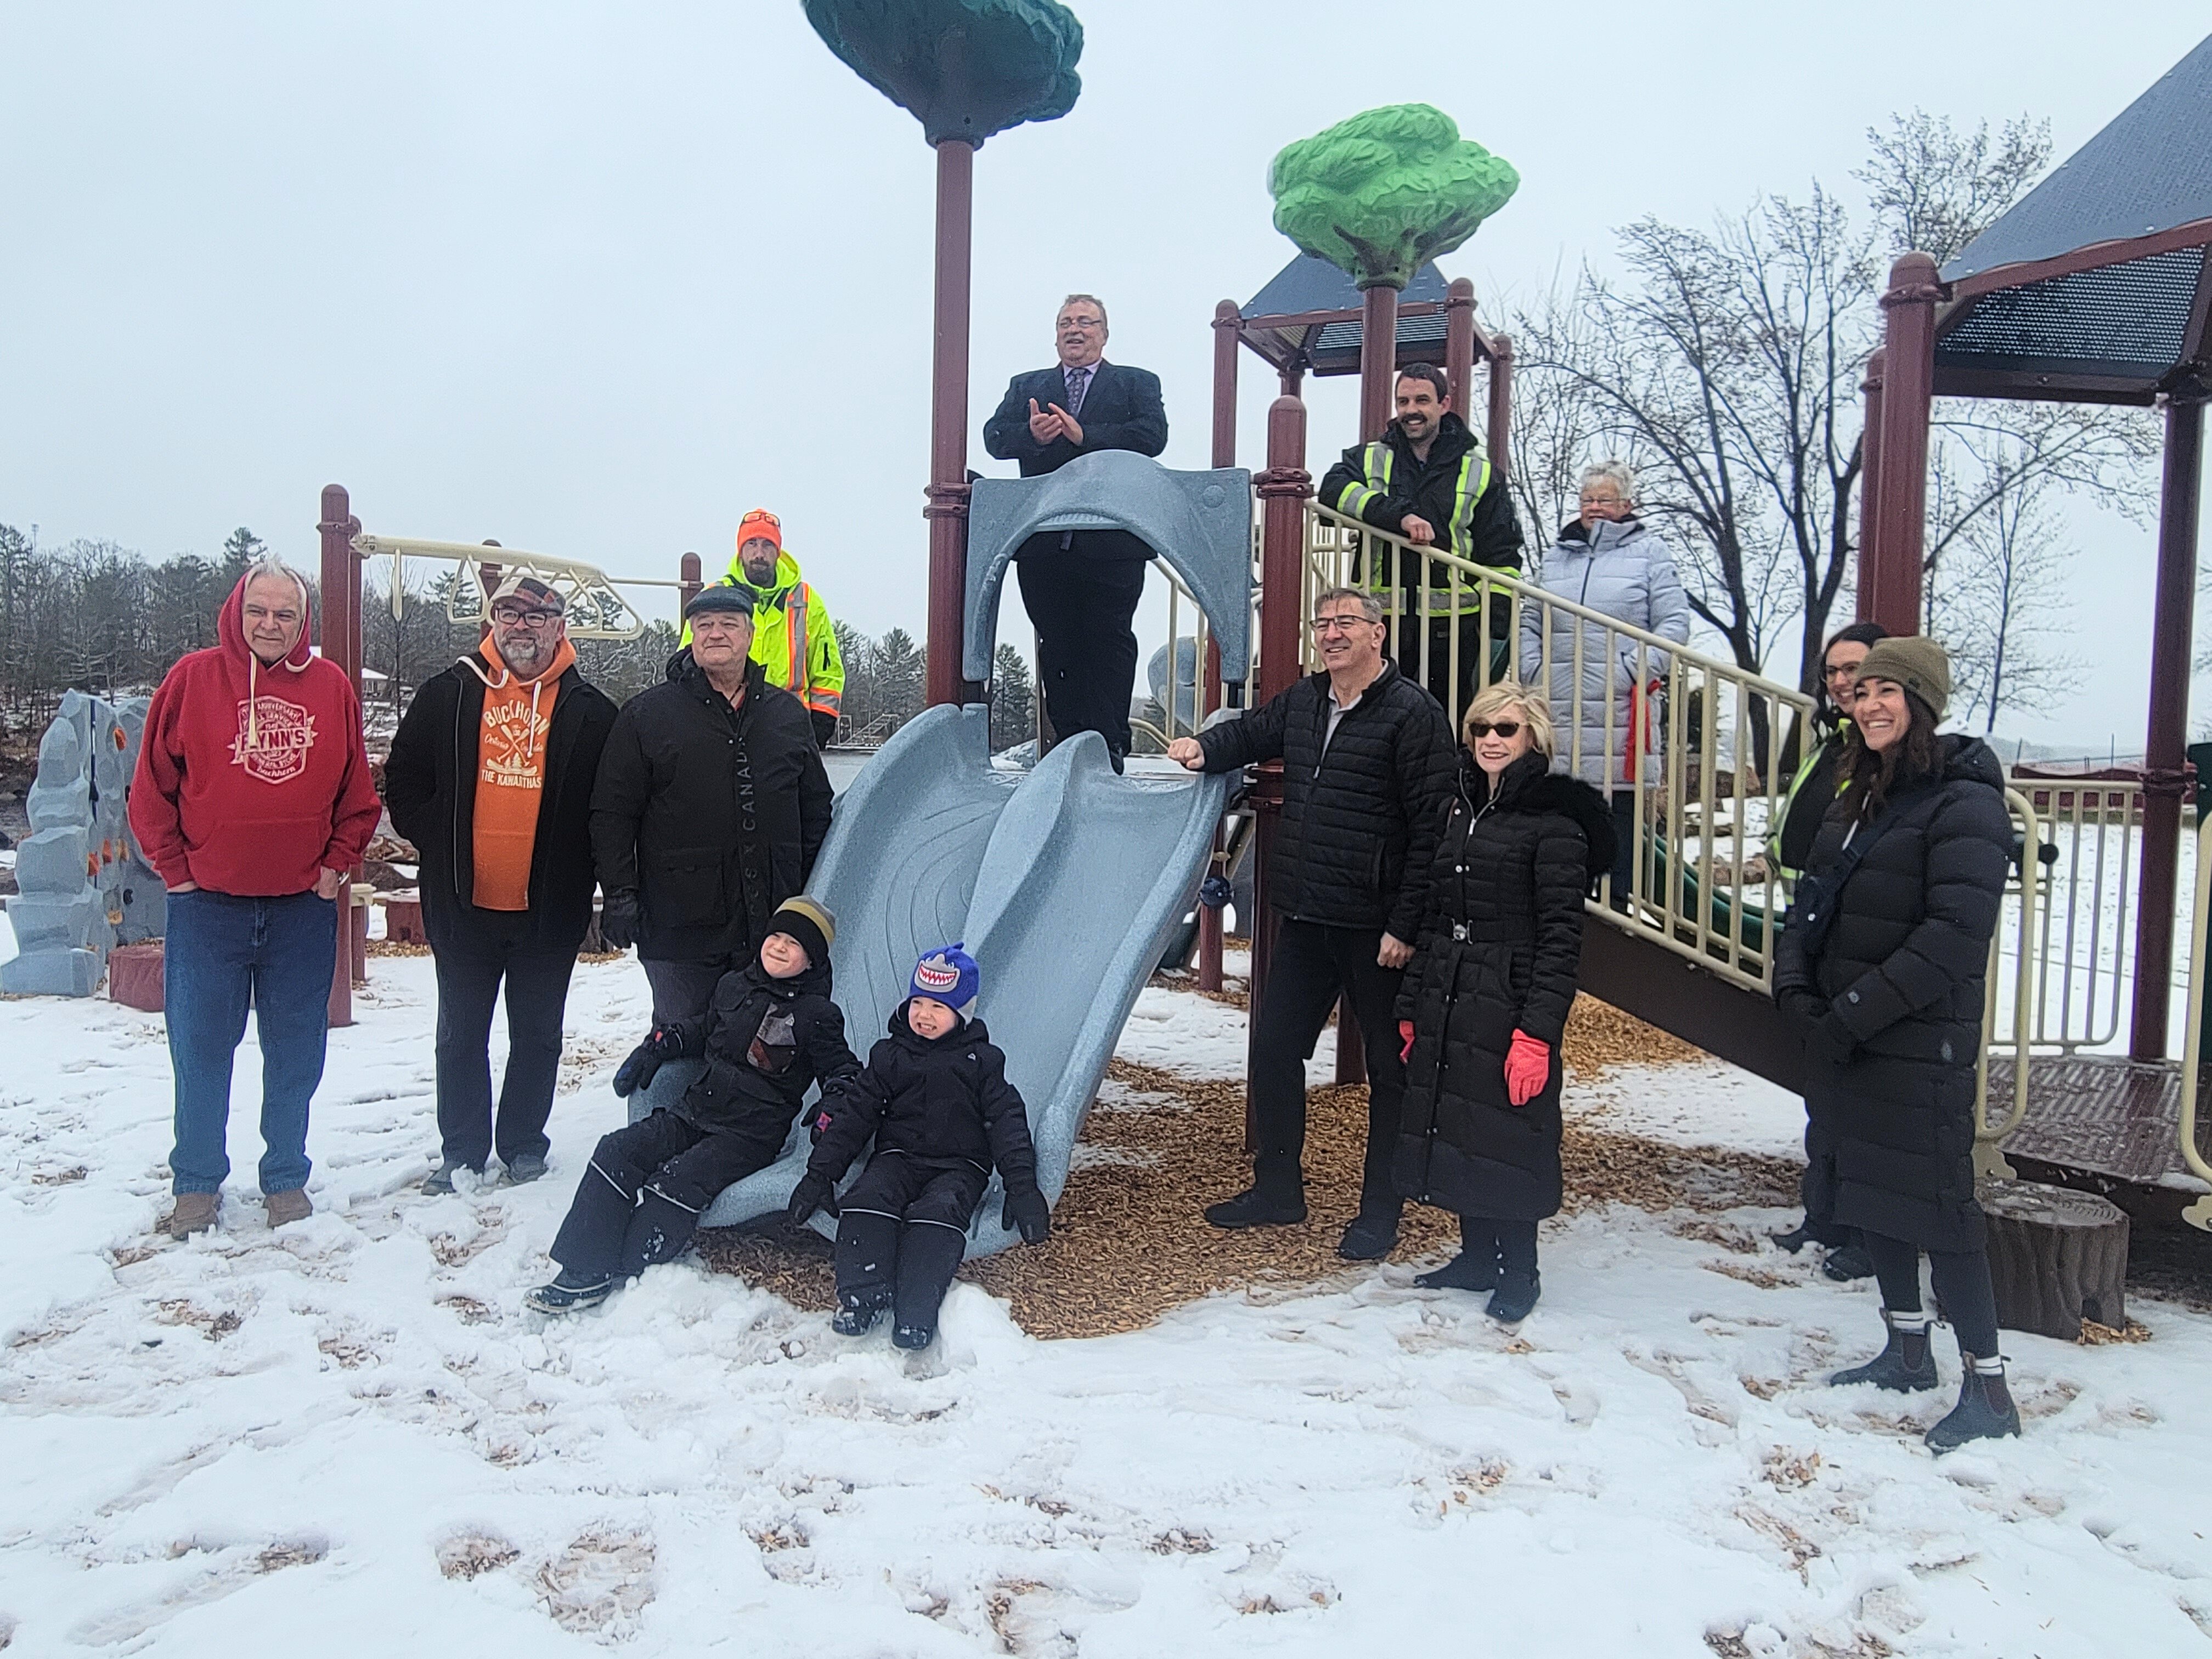 Members of the public and Municipal staff gather around playground for a photo.